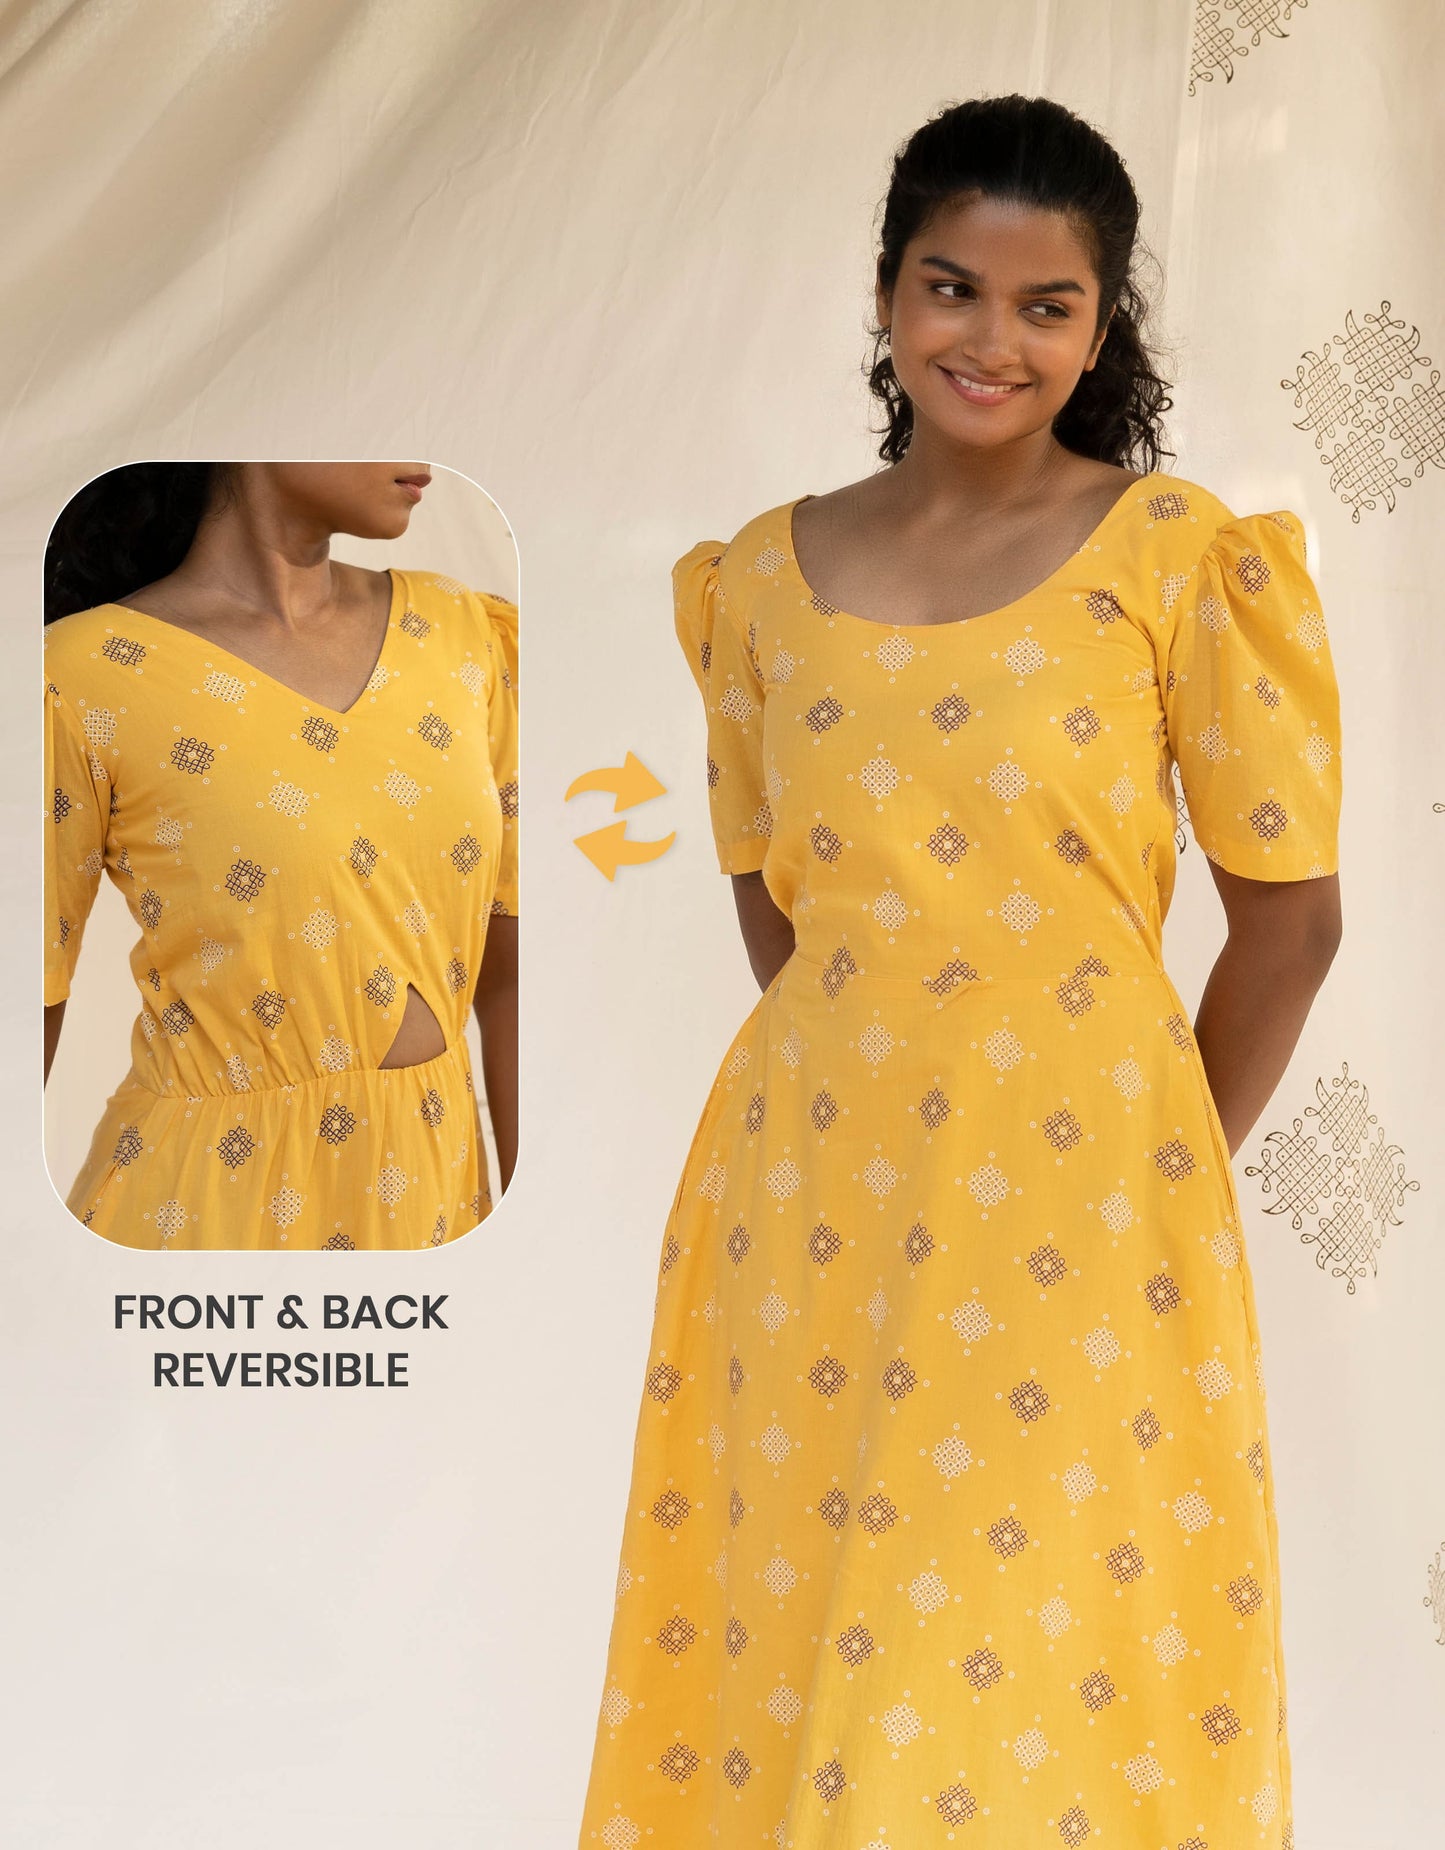 Hueloom Yellow Reversible Cut-out Dress front view without cut showing a versatile front and back reversible outfit option